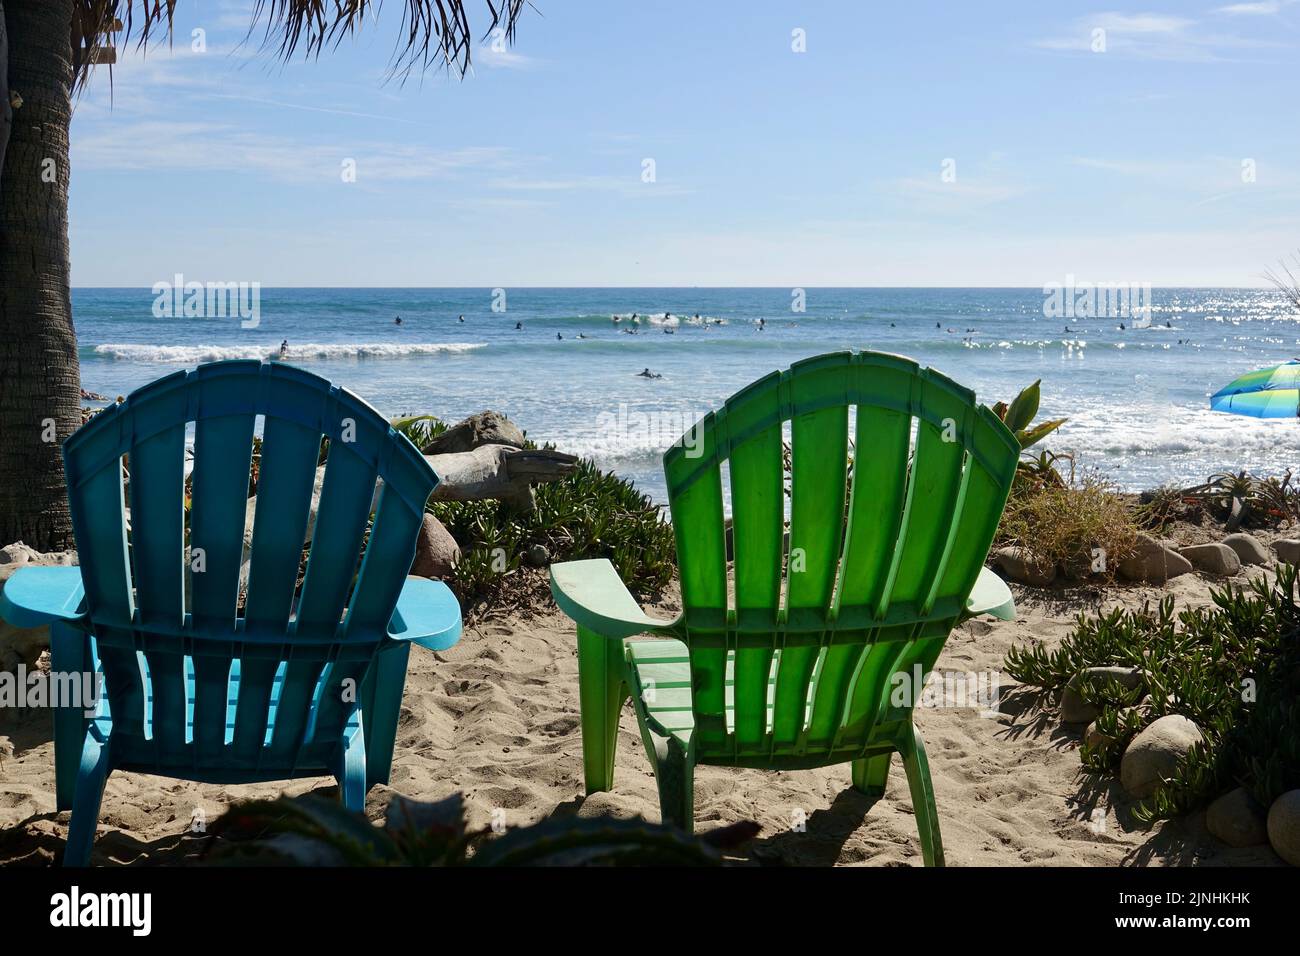 Adirondack chairs on the beach at San Onofre Stock Photo